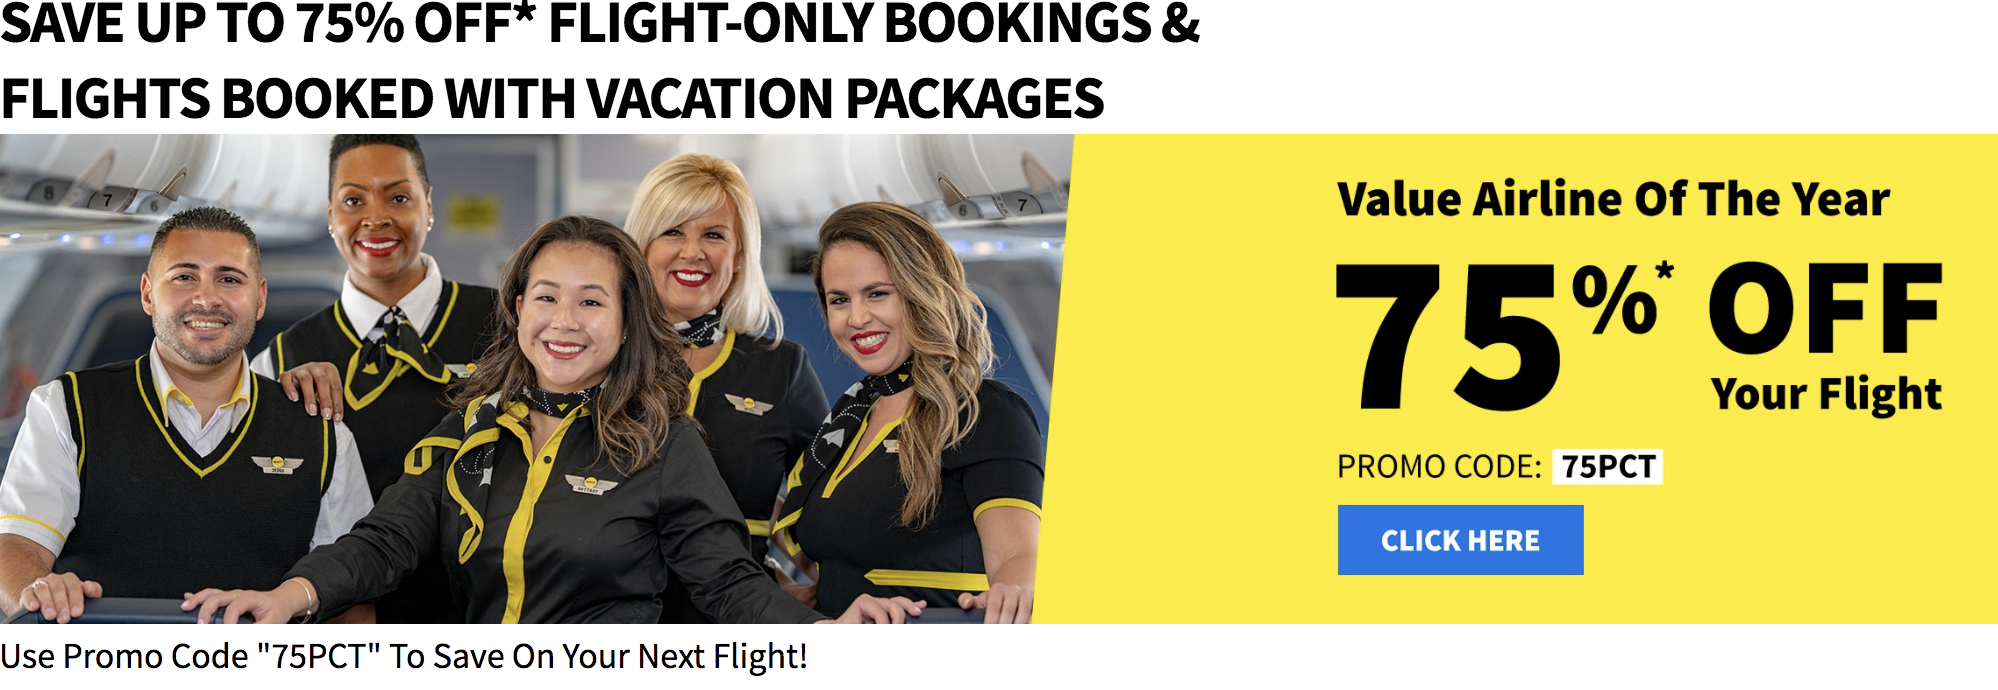 Spirit Airlines Sale with 75 OFF Base Fares. Book By Tonight Miles to Memories